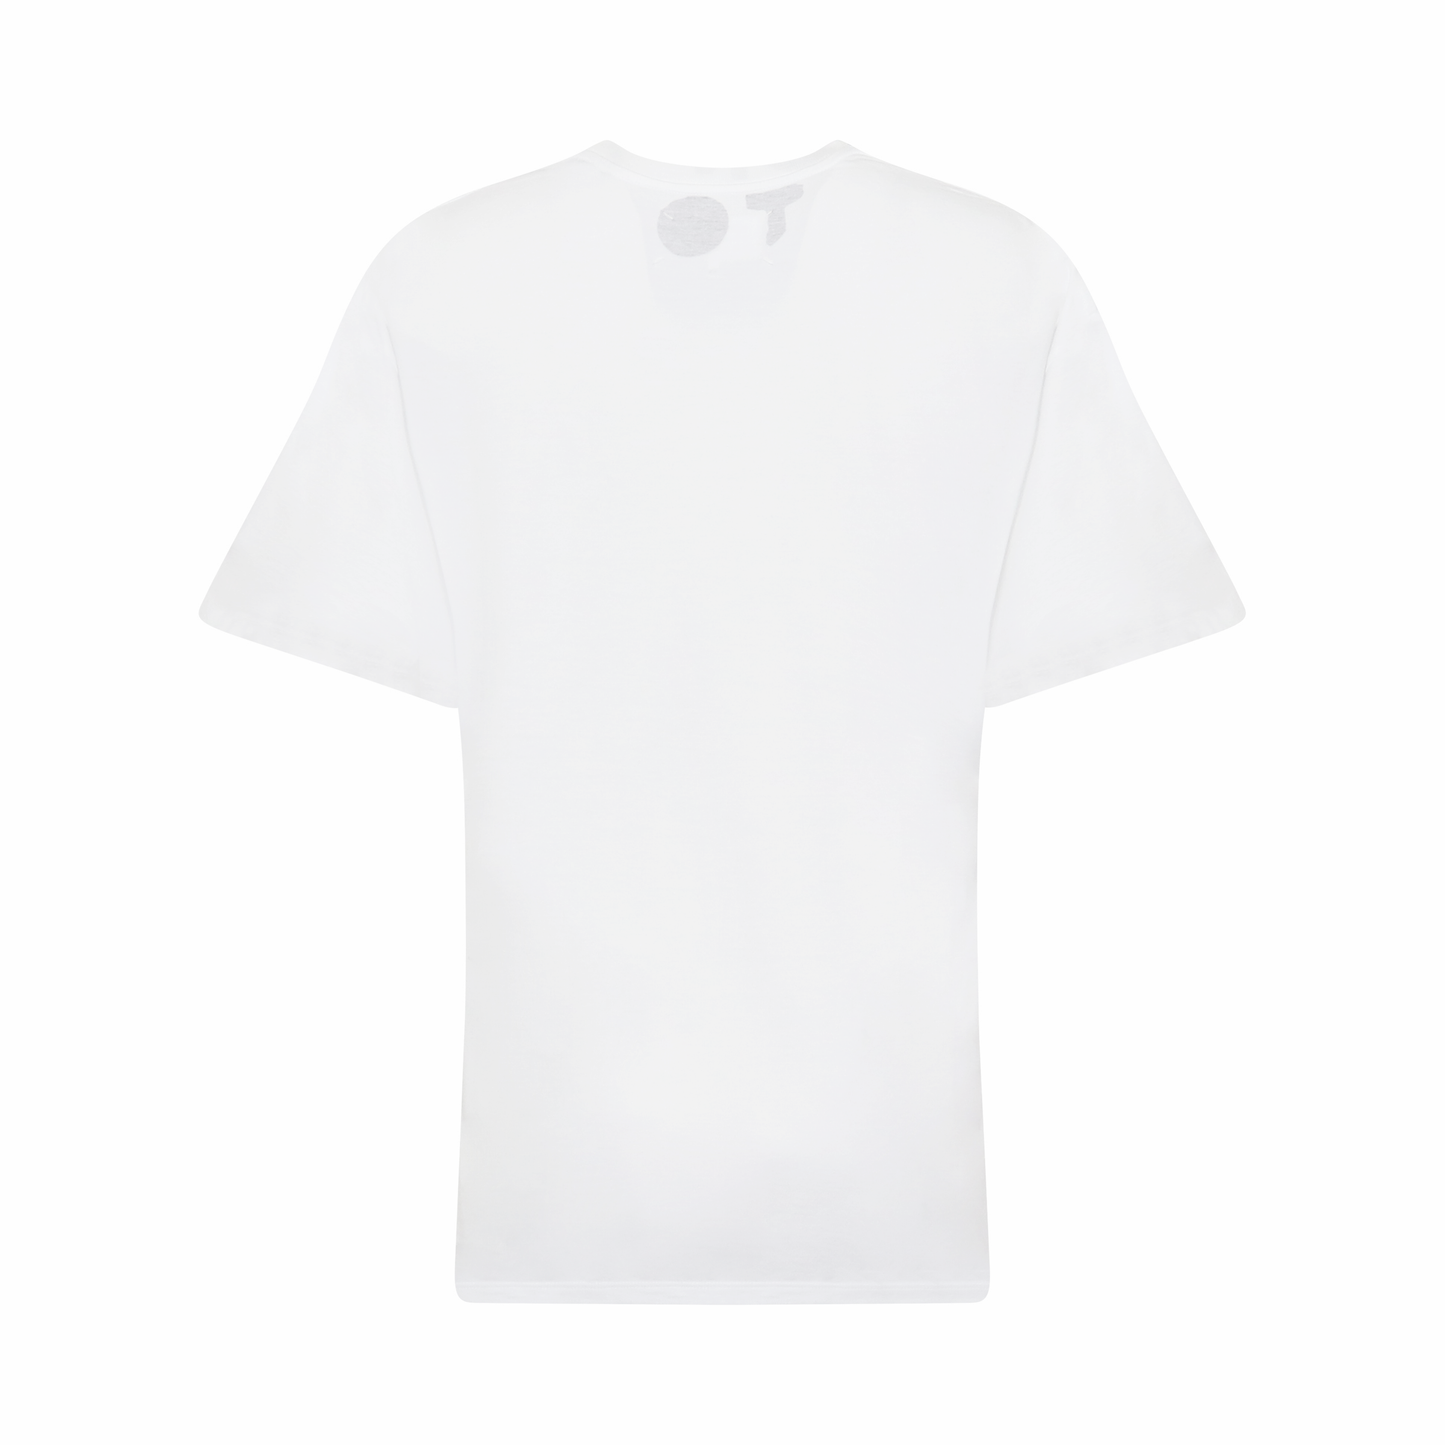 AIDS Charity T-Shirts in White